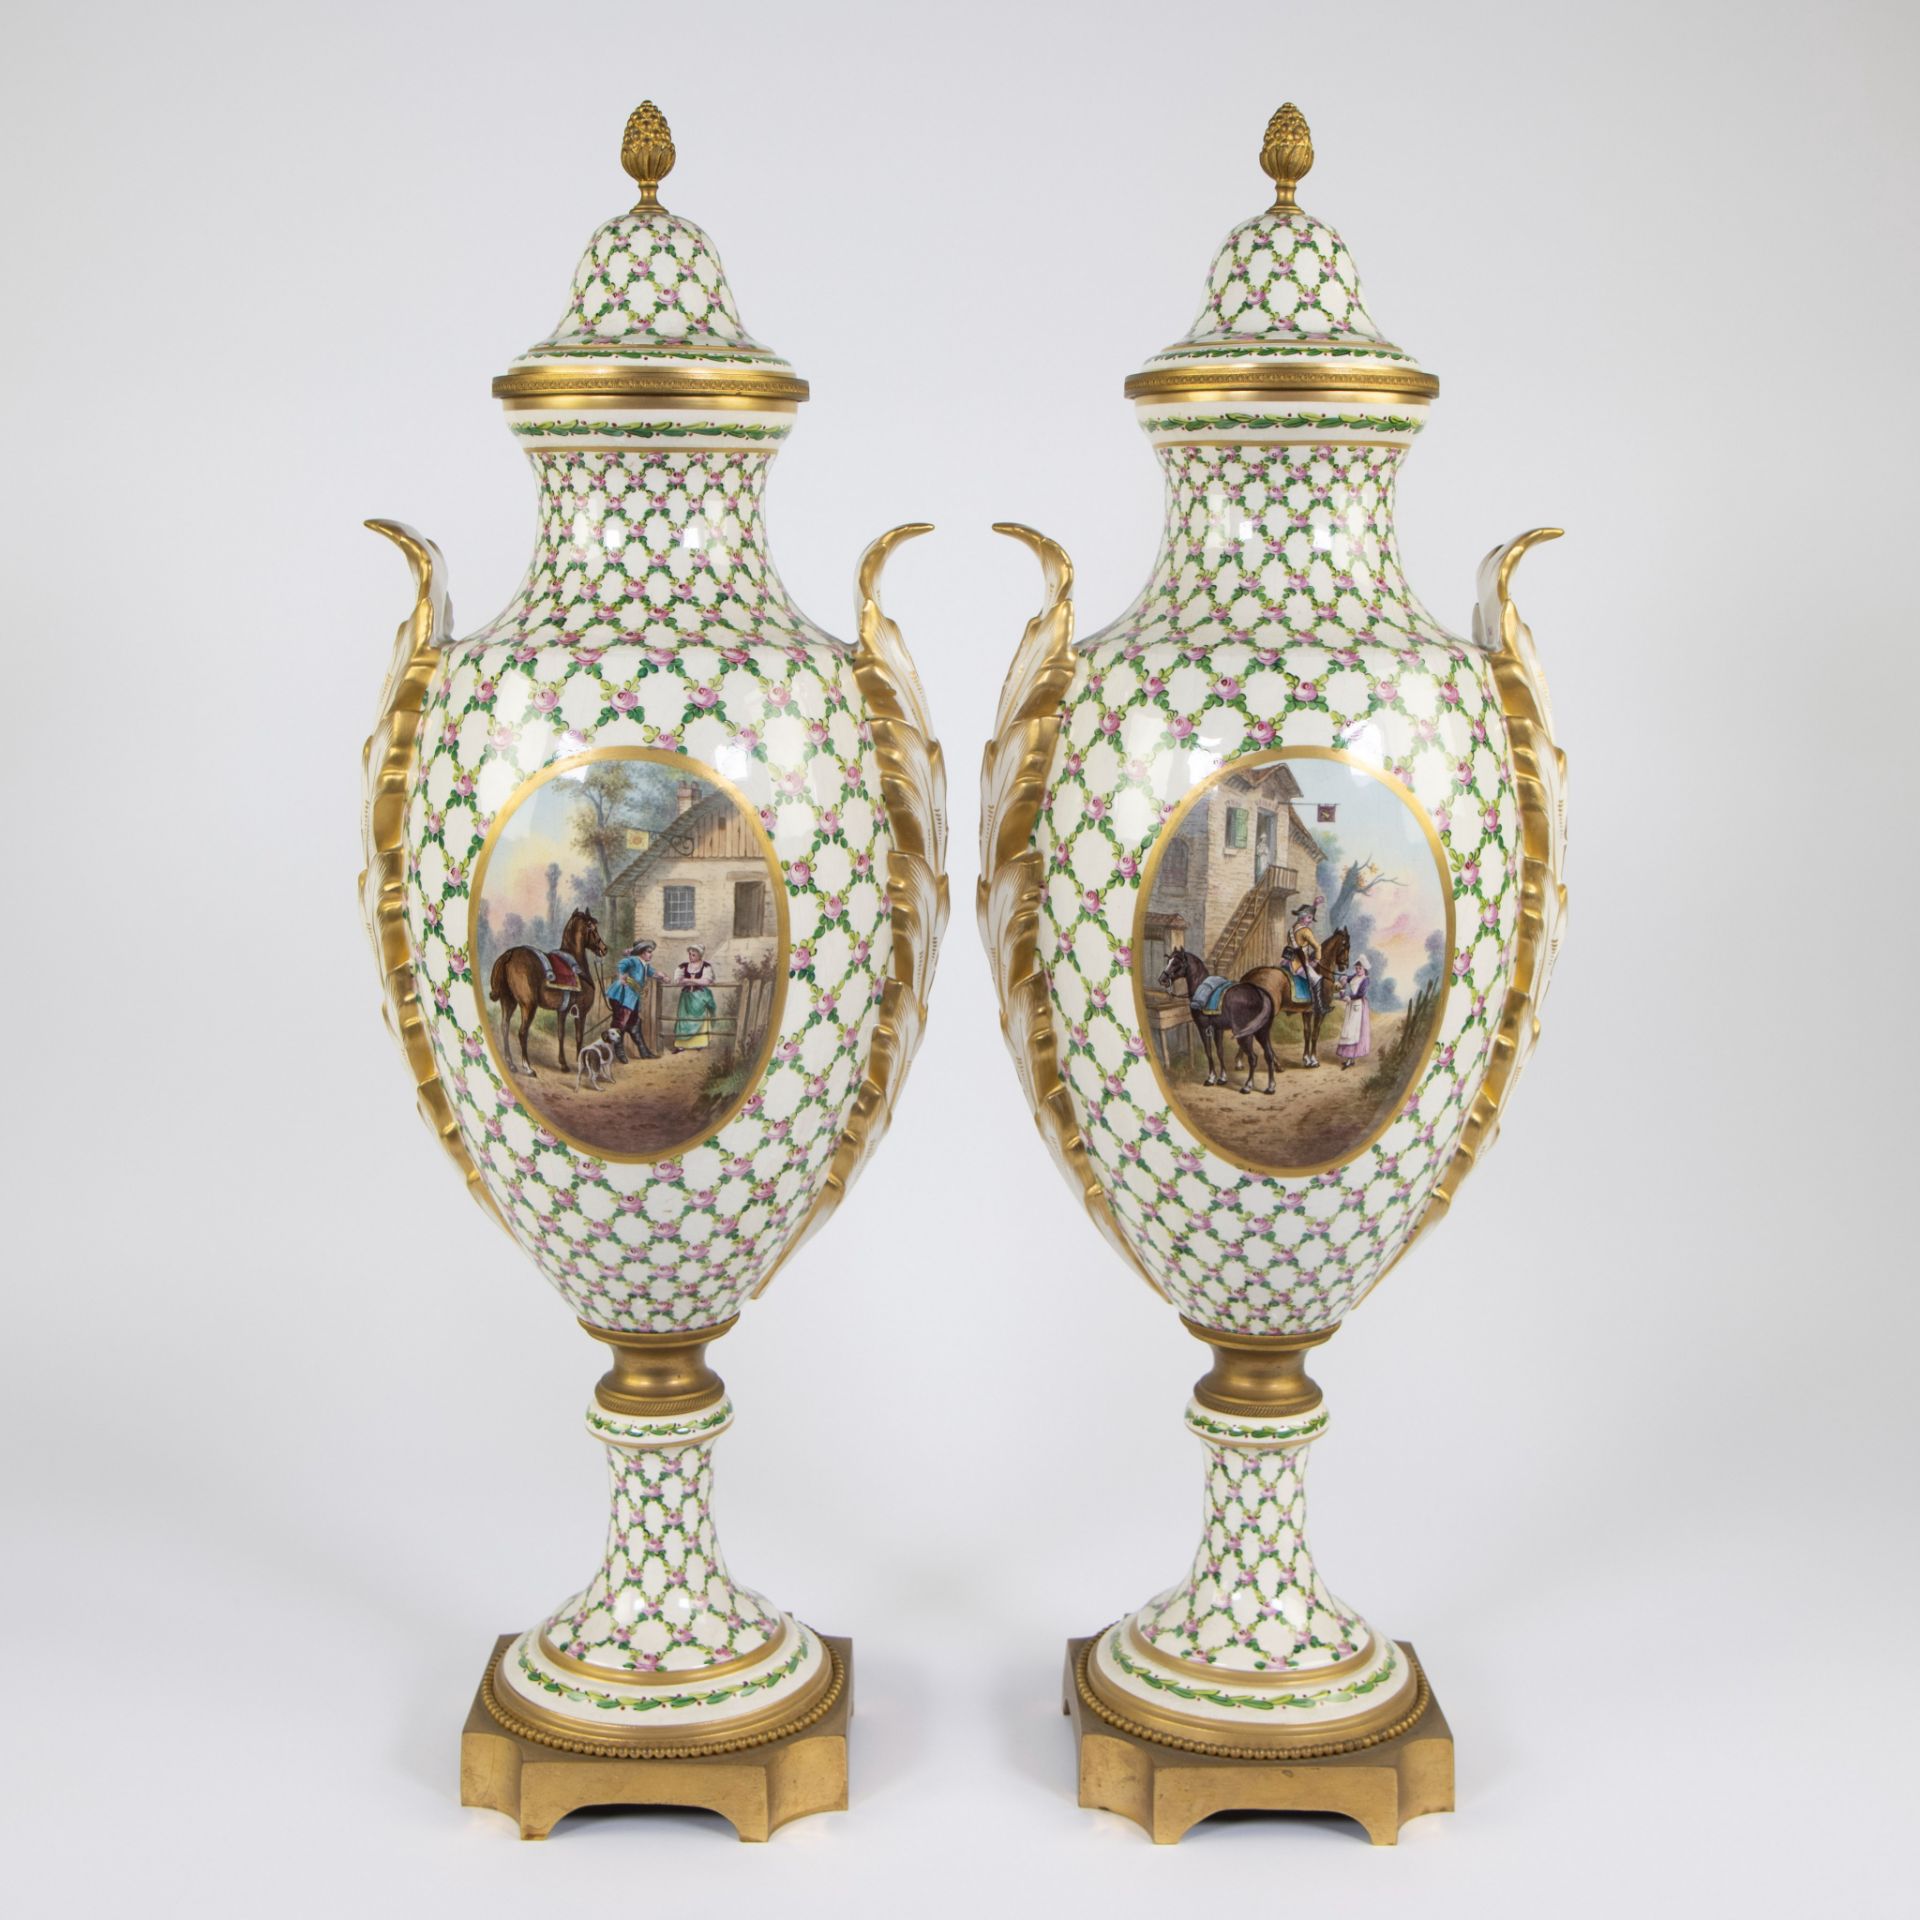 Pair of porcelain Sèvres vases on a gilt brass base with a background of leaves and pink flowers, pa